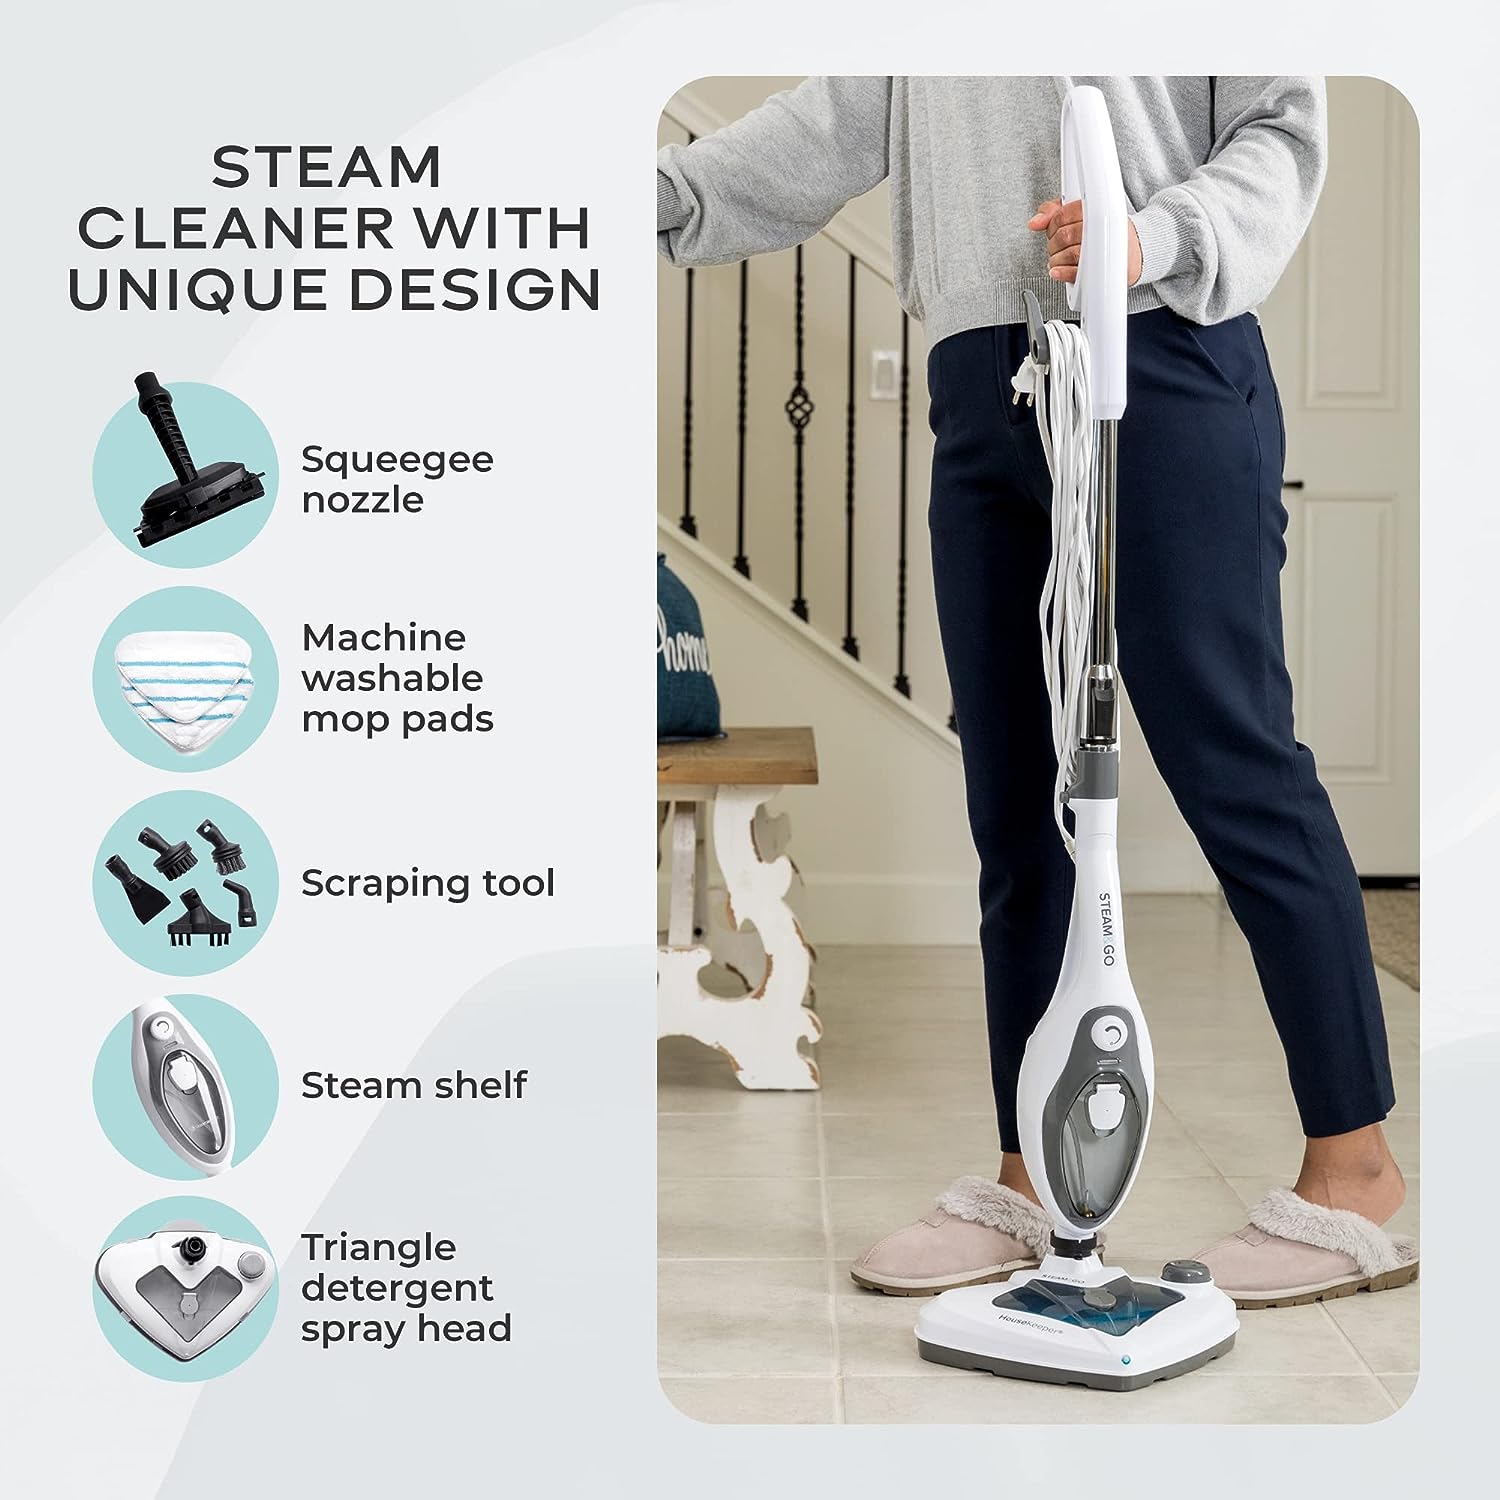 https://bigbigmart.com/wp-content/uploads/2023/08/Steam-and-Go-Steam-Mop-Floor-Steamer-with-Handheld-Steam-Cleaner-for-Tile-and-Grout-Hardwood-Floors-Laminate-Glass-Fabric-Upholstery2.jpg